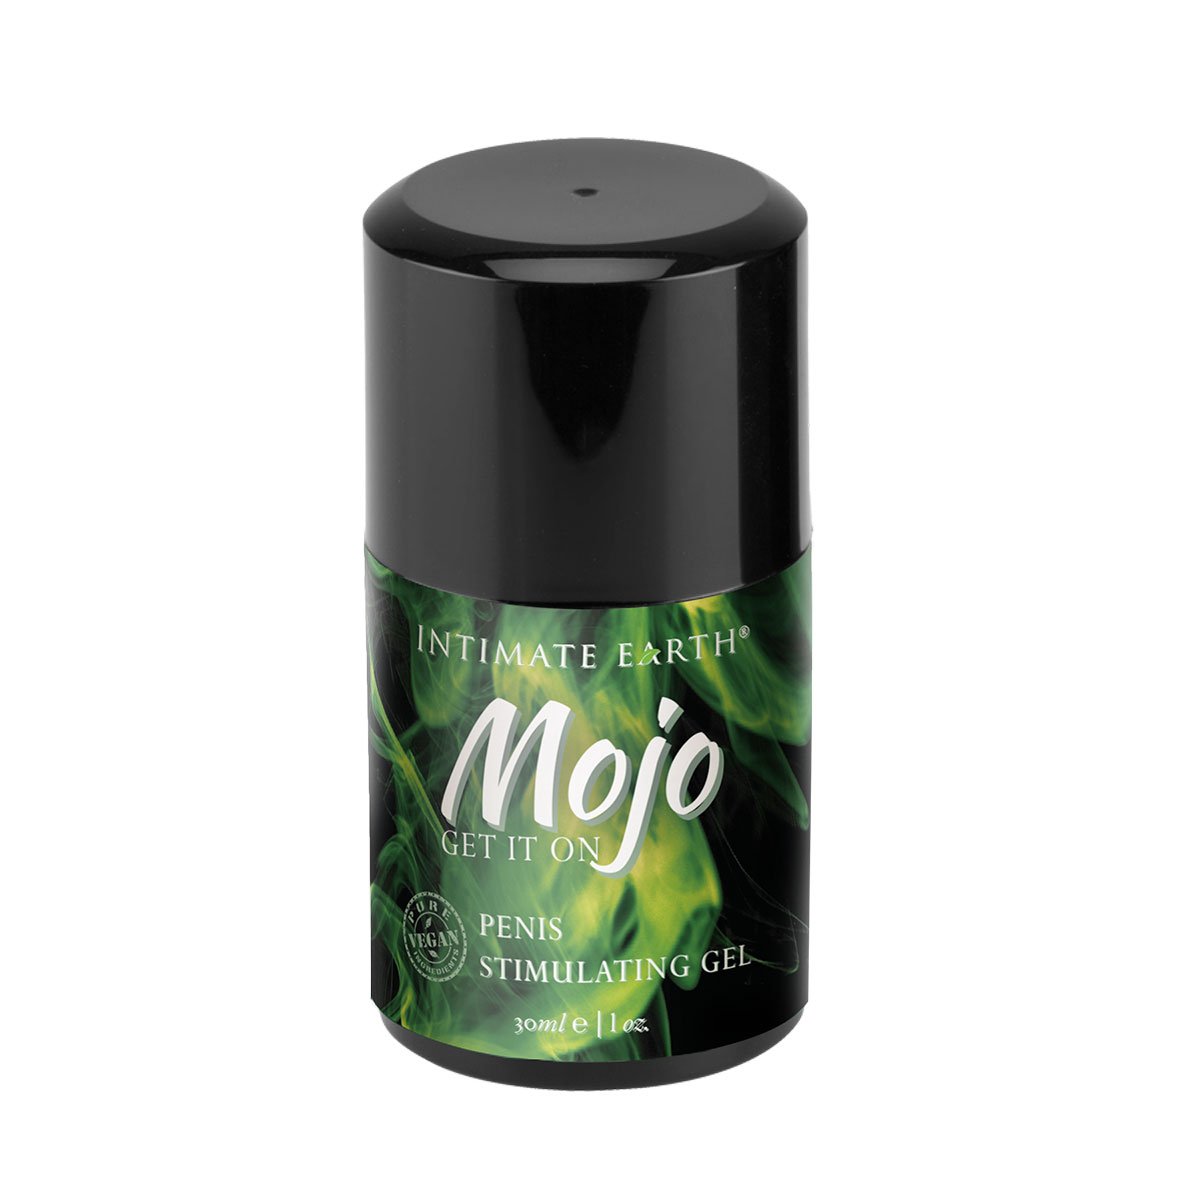 Intimate Earth MOJO Penis Stimulating Gel 1oz-30ml - Buy At Luxury Toy X - Free 3-Day Shipping